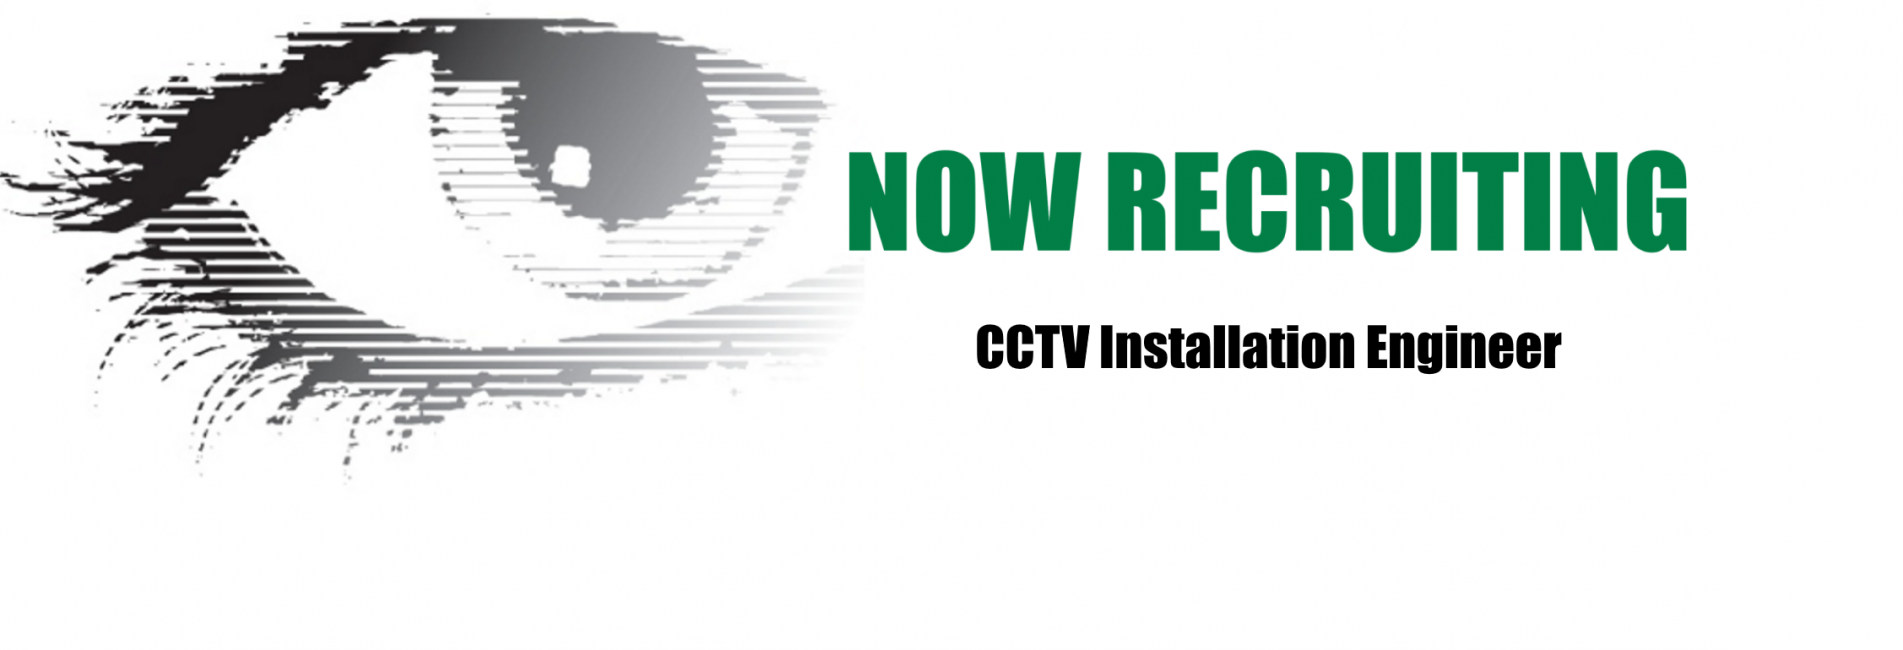 A CCTV Installation Engineer job opportunity to join a small company based on the Shropshire/Powys border that specialises in CCTV systems.